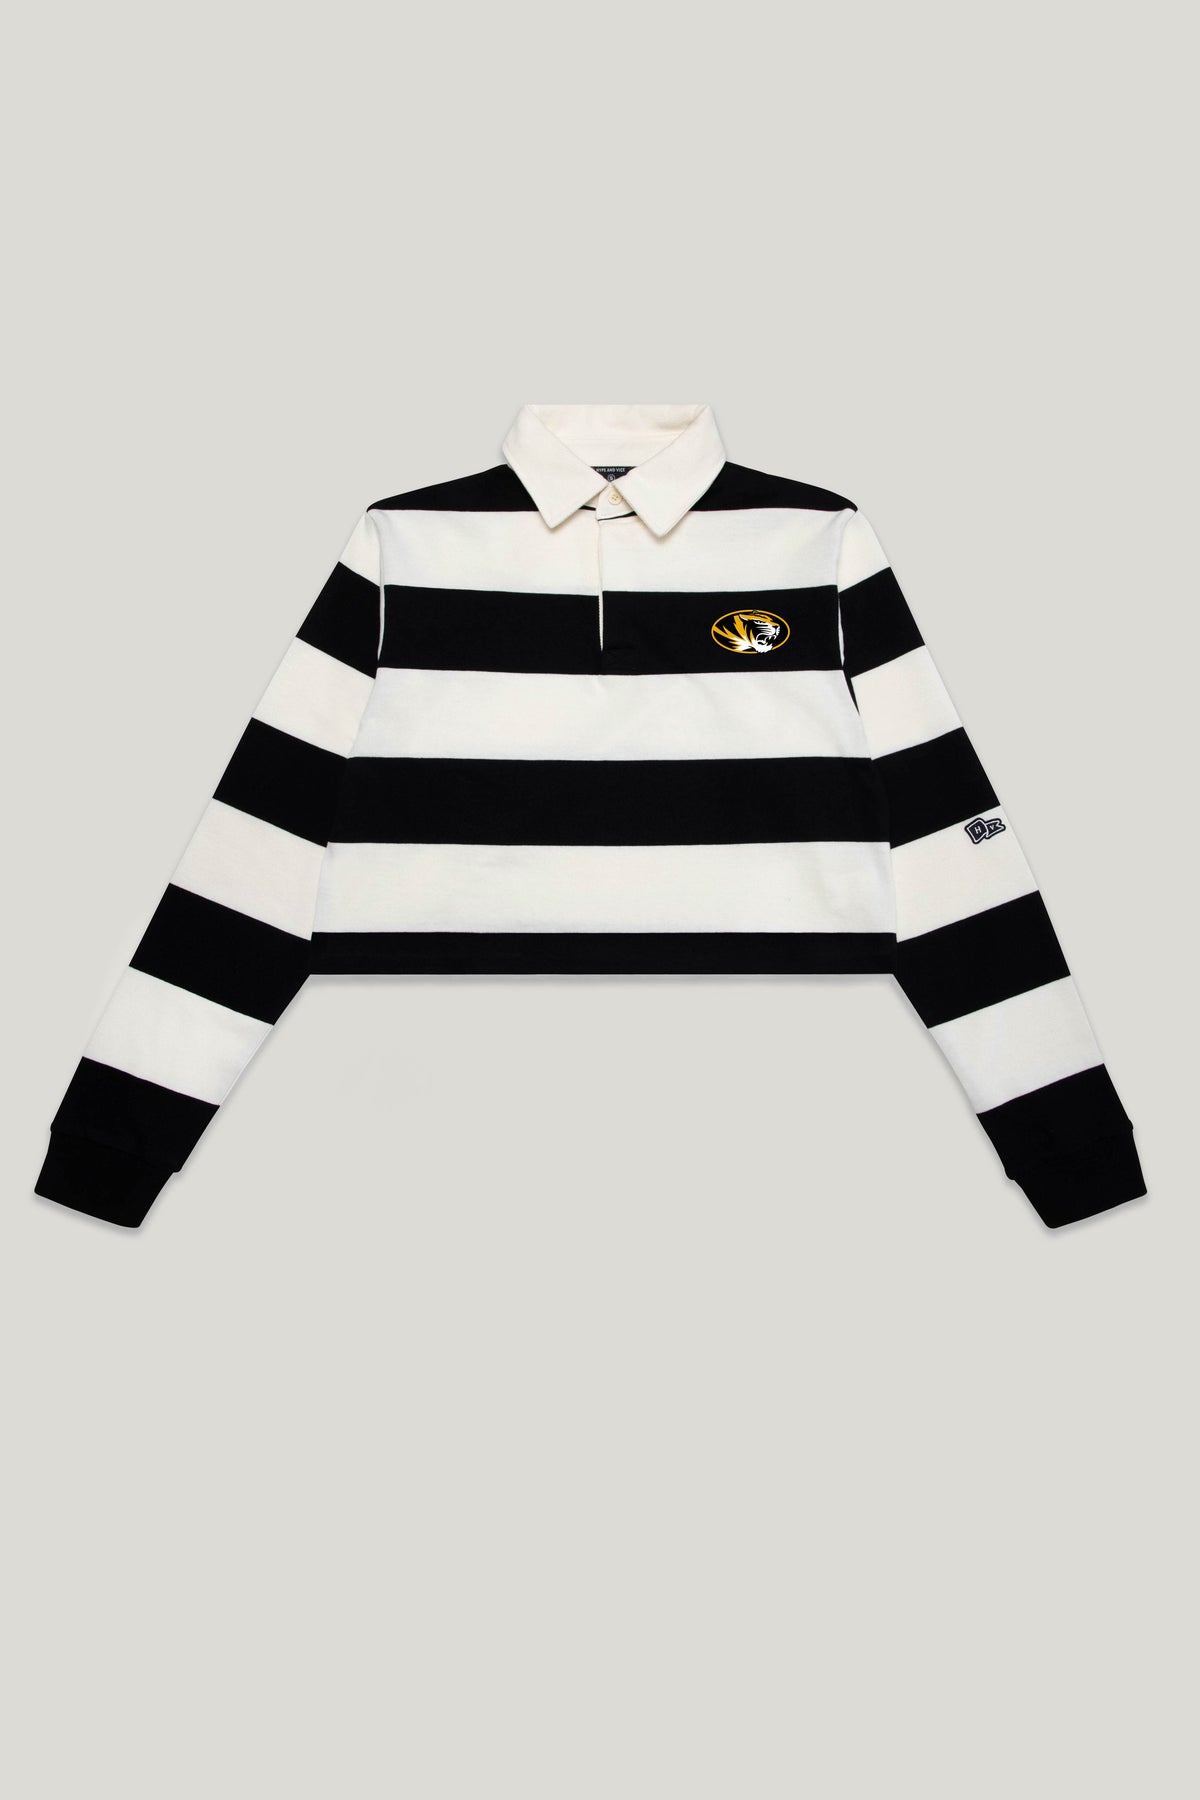 Missouri Rugby Top